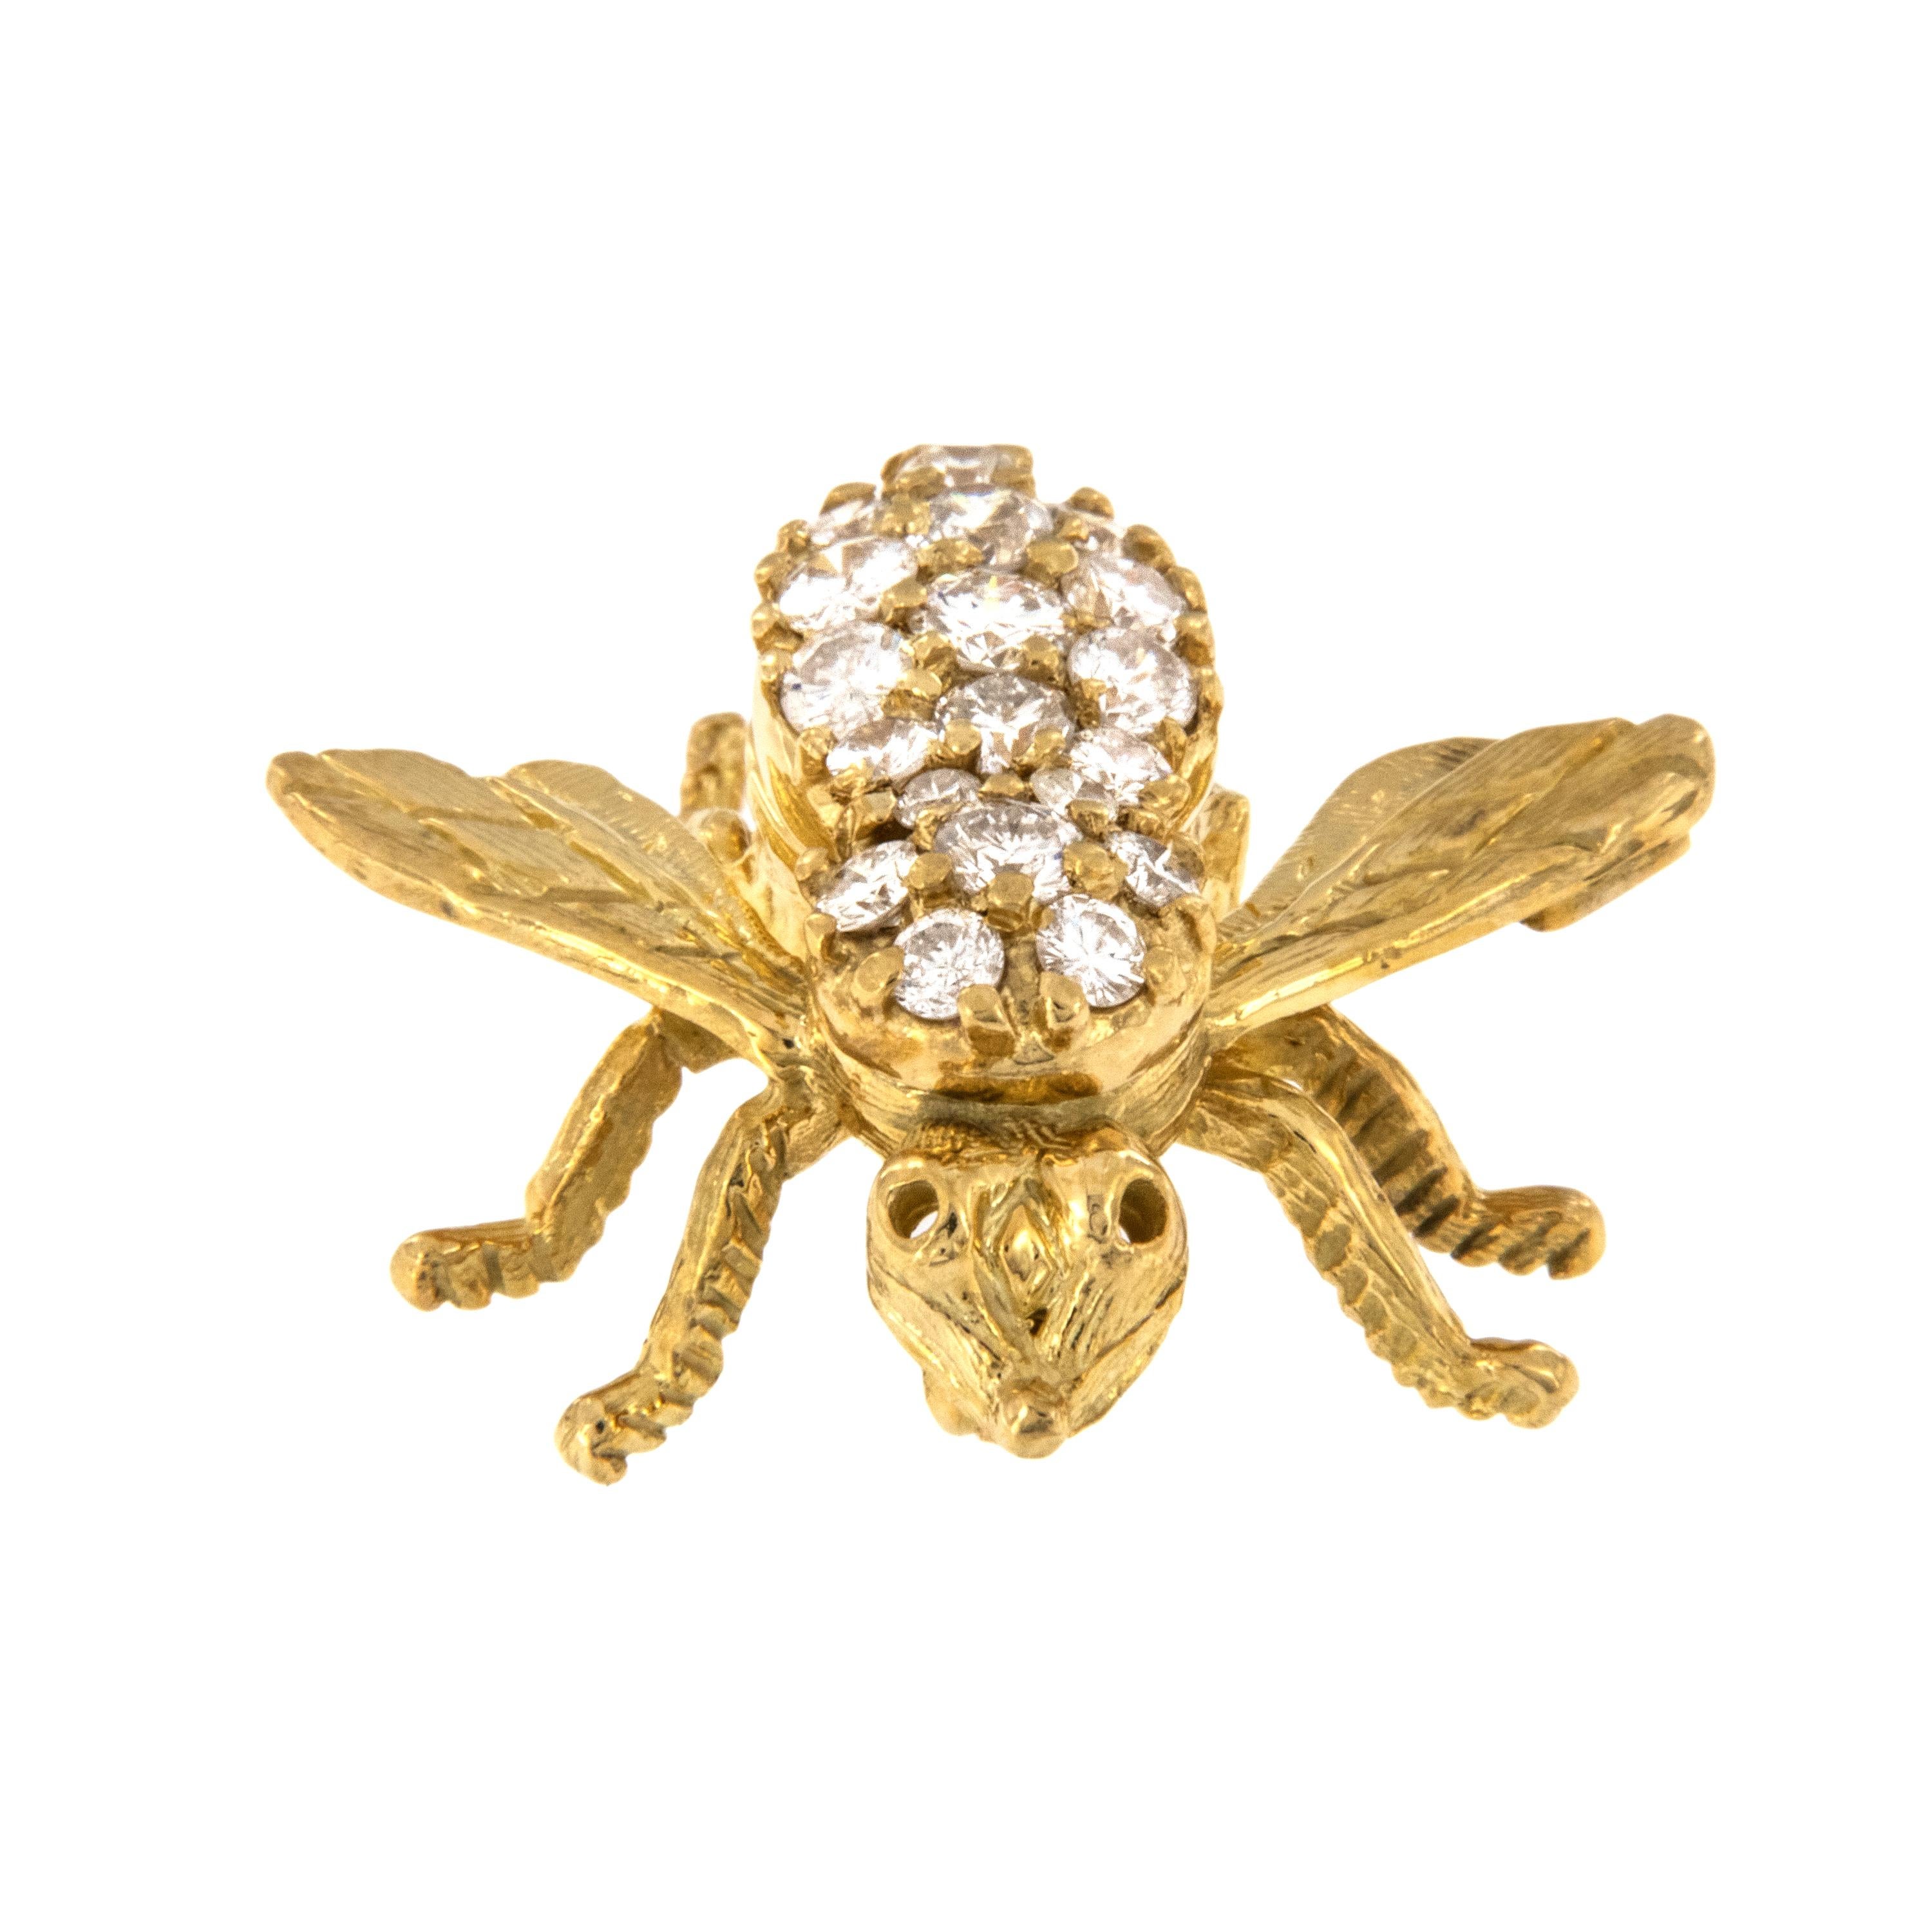 Sweet as a honey bee - this pin looks adorable perched on your lapel, shoulder or converted as a pendant. Wear this vintage 18 karat yellow gold diamond encrusted pin as an accessory and show your support of how important this species is to our